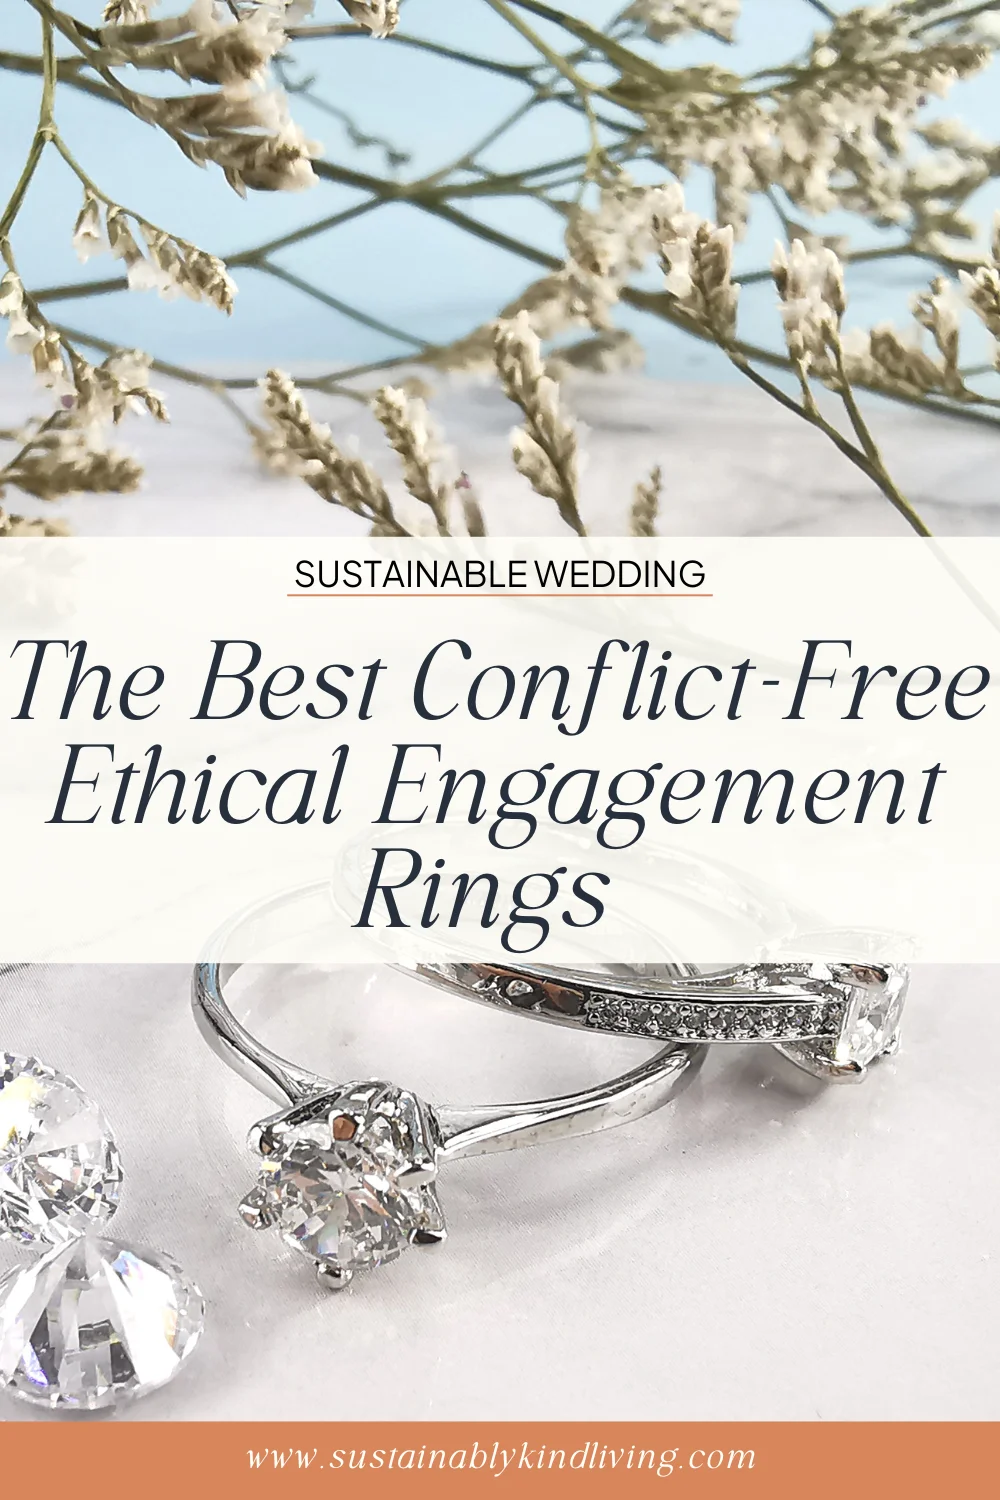 Diamonds aren't forever: Why cheaper engagement rings may mean a longer  marriage